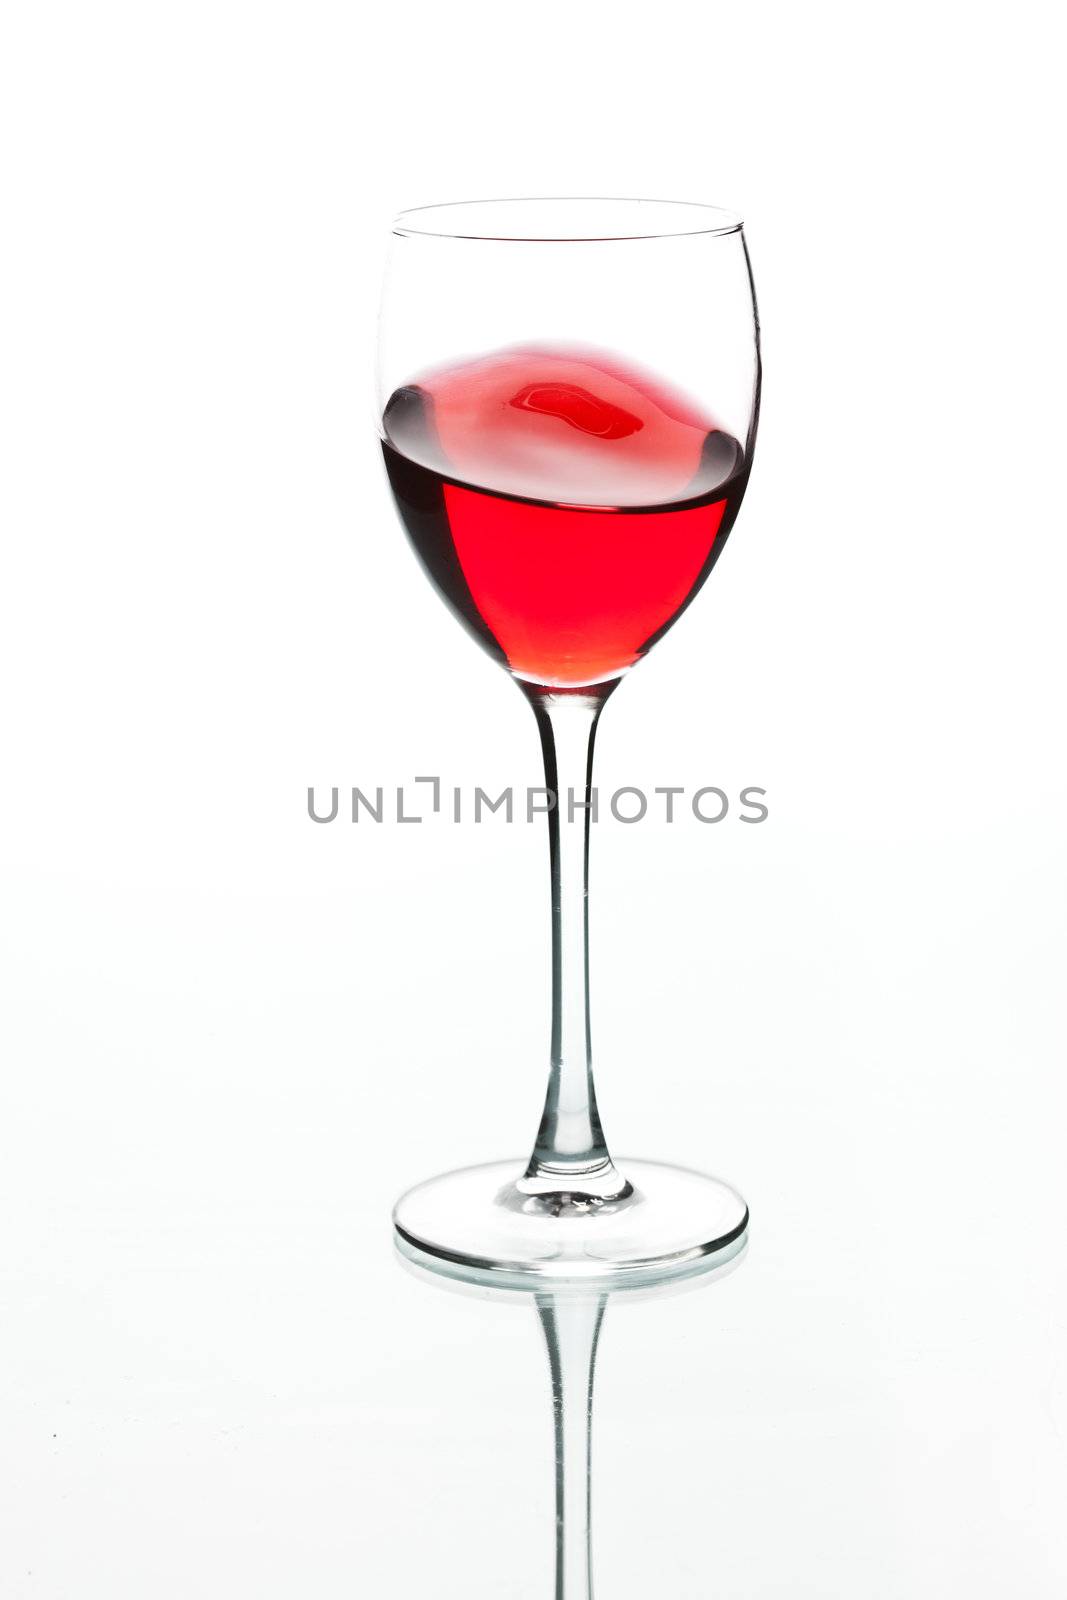 food series: glass of tasty red wine